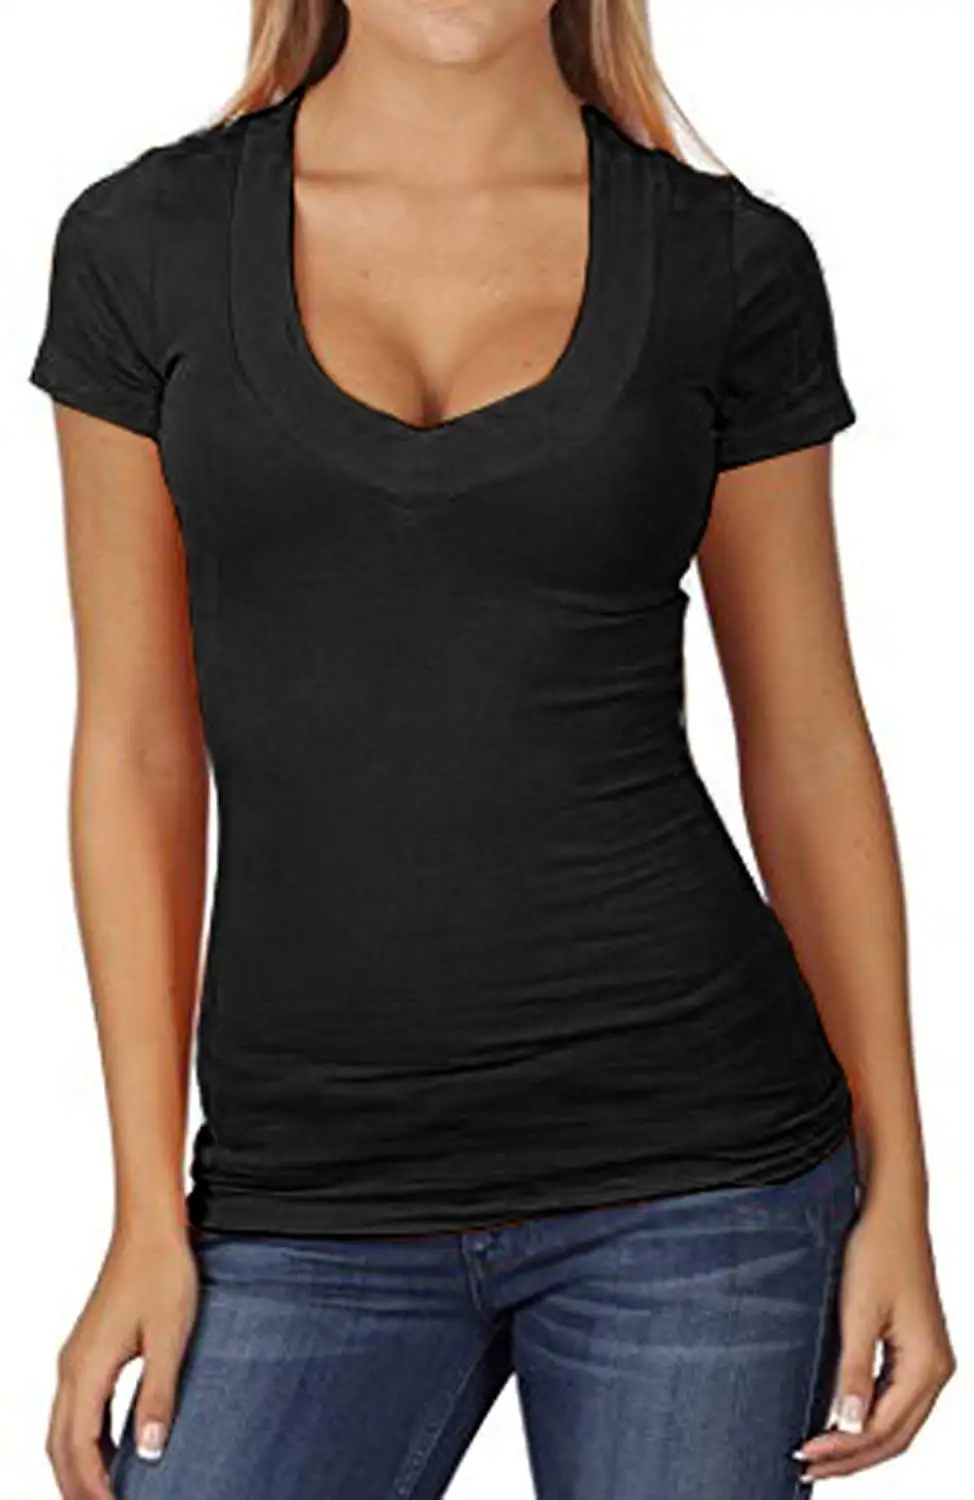 Cheap Low Cut Tops Cleavage, find Low Cut Tops Cleavage deals on line ...